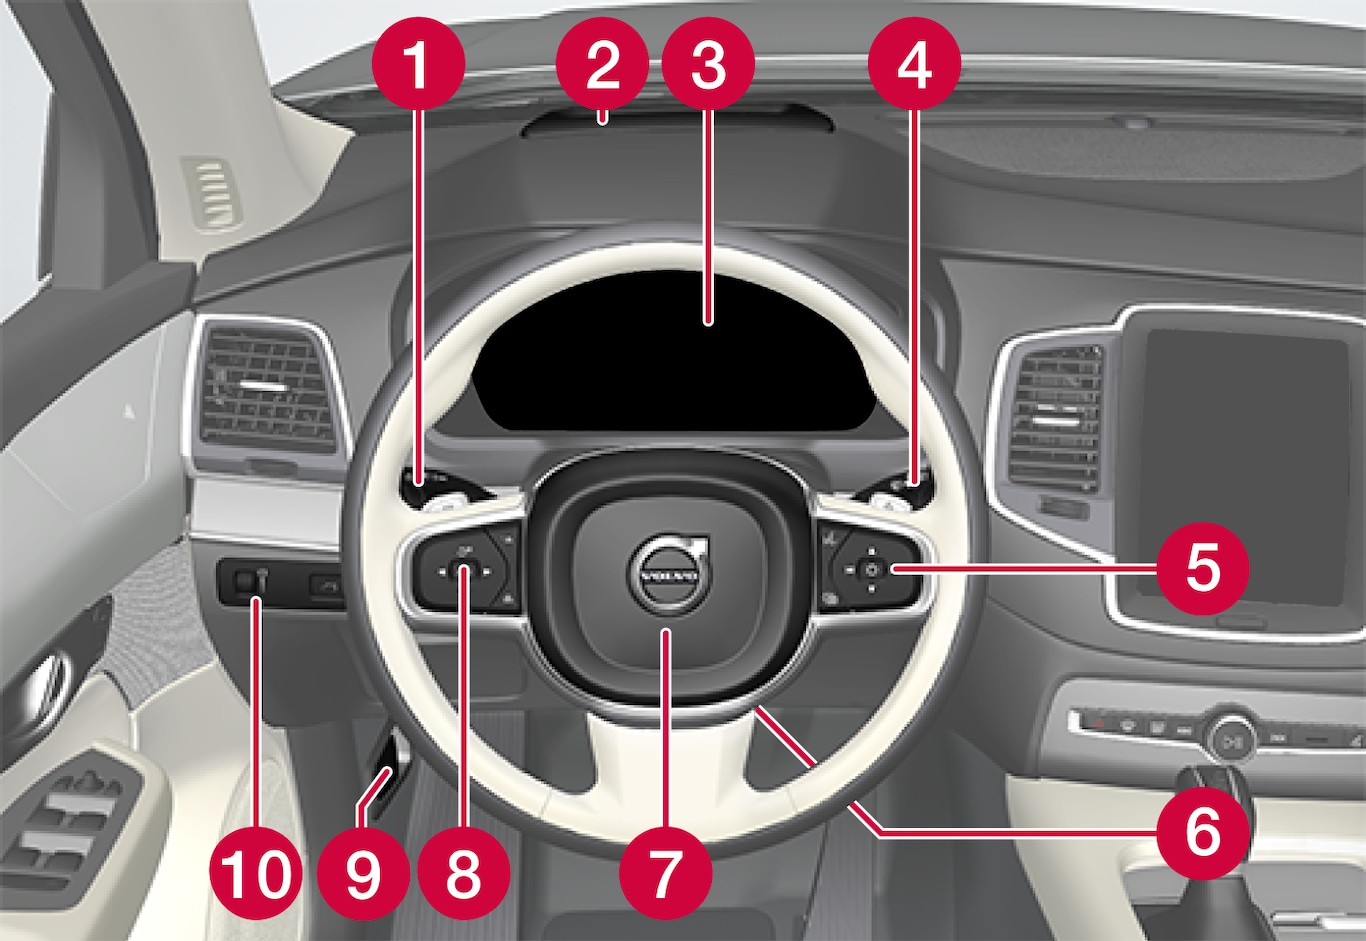 P5-XC90-21w22-Displays and controls, left hand drive